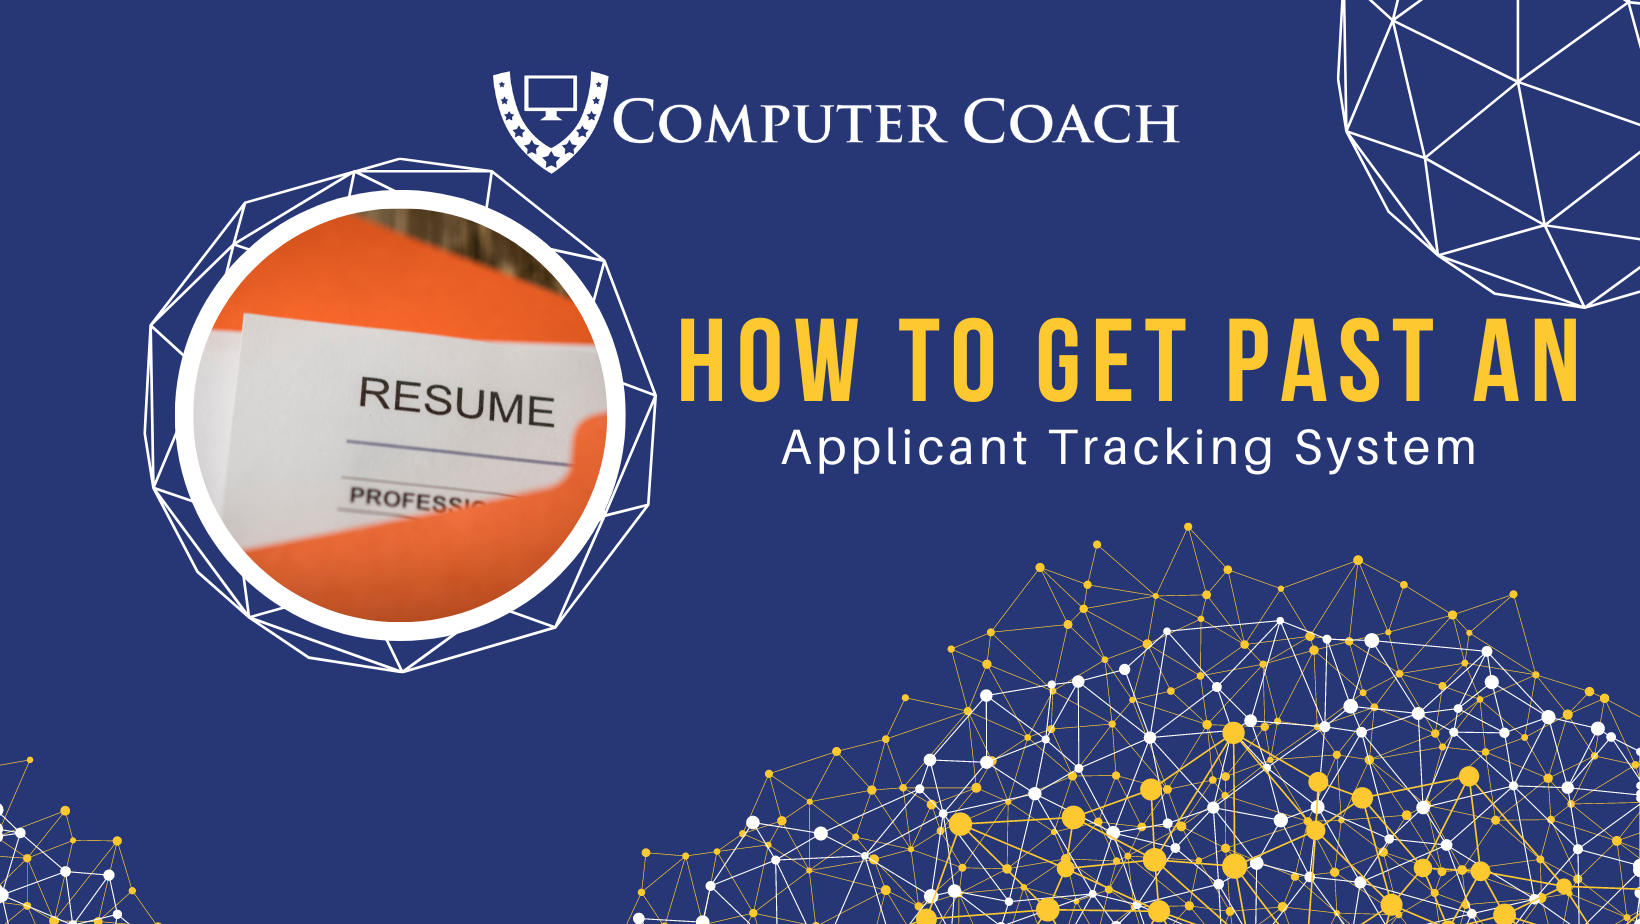 Getting past an applicant tracking system comes down to 7 tips.